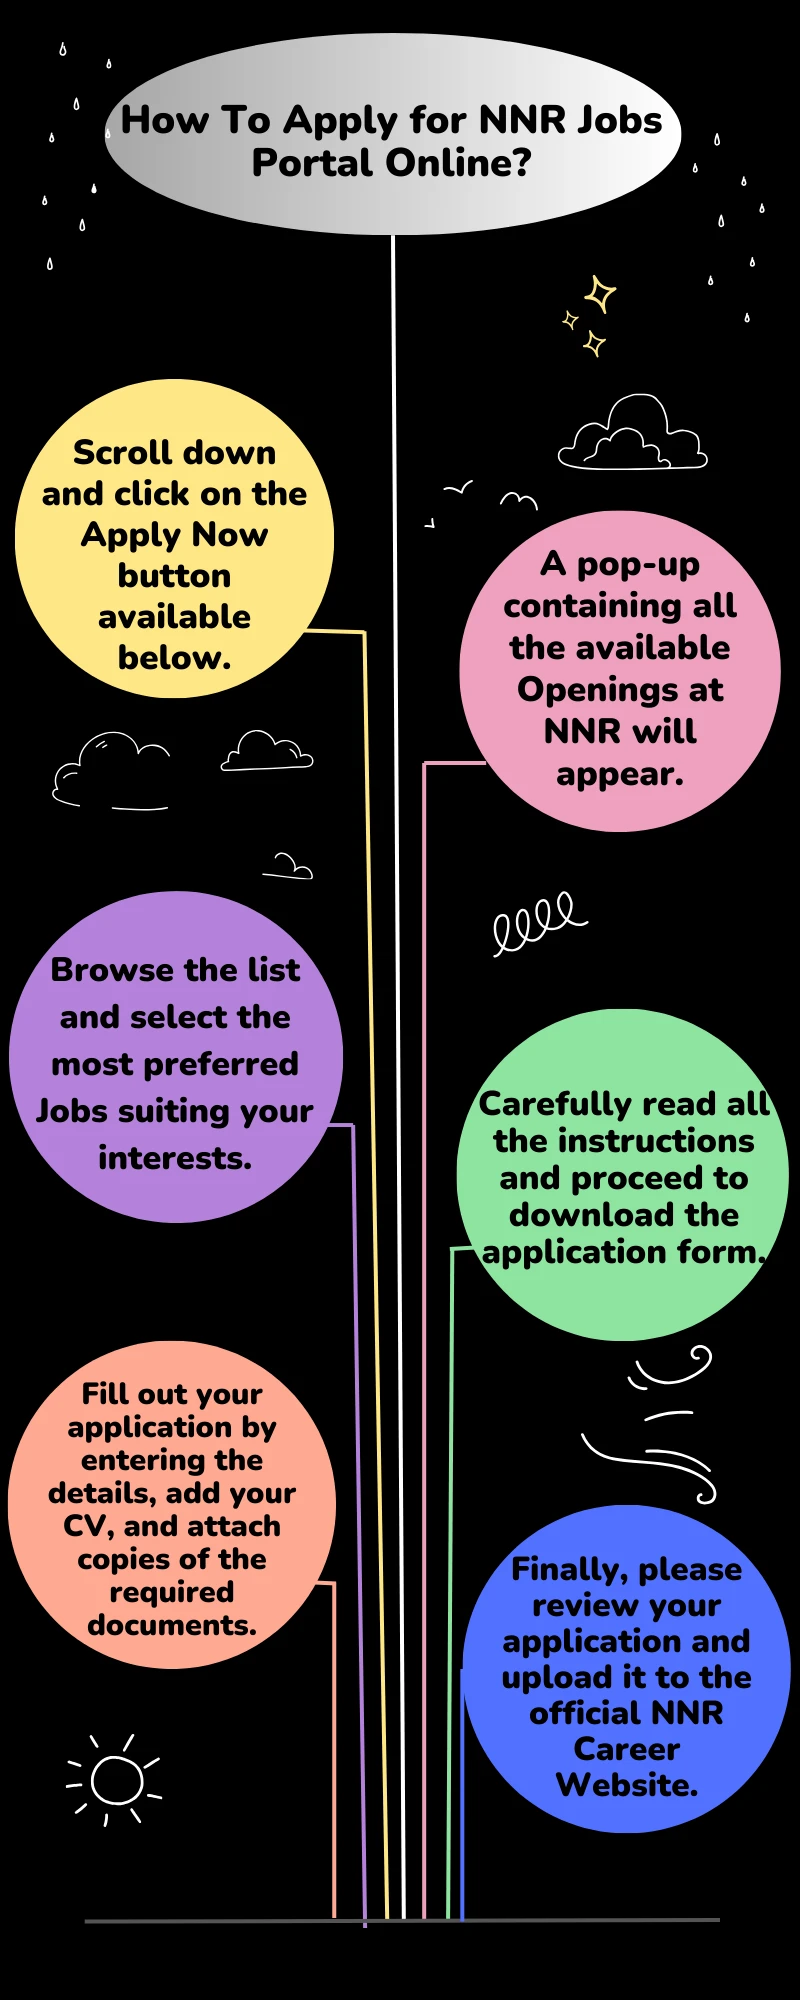 How To Apply for NNR Jobs Portal Online?